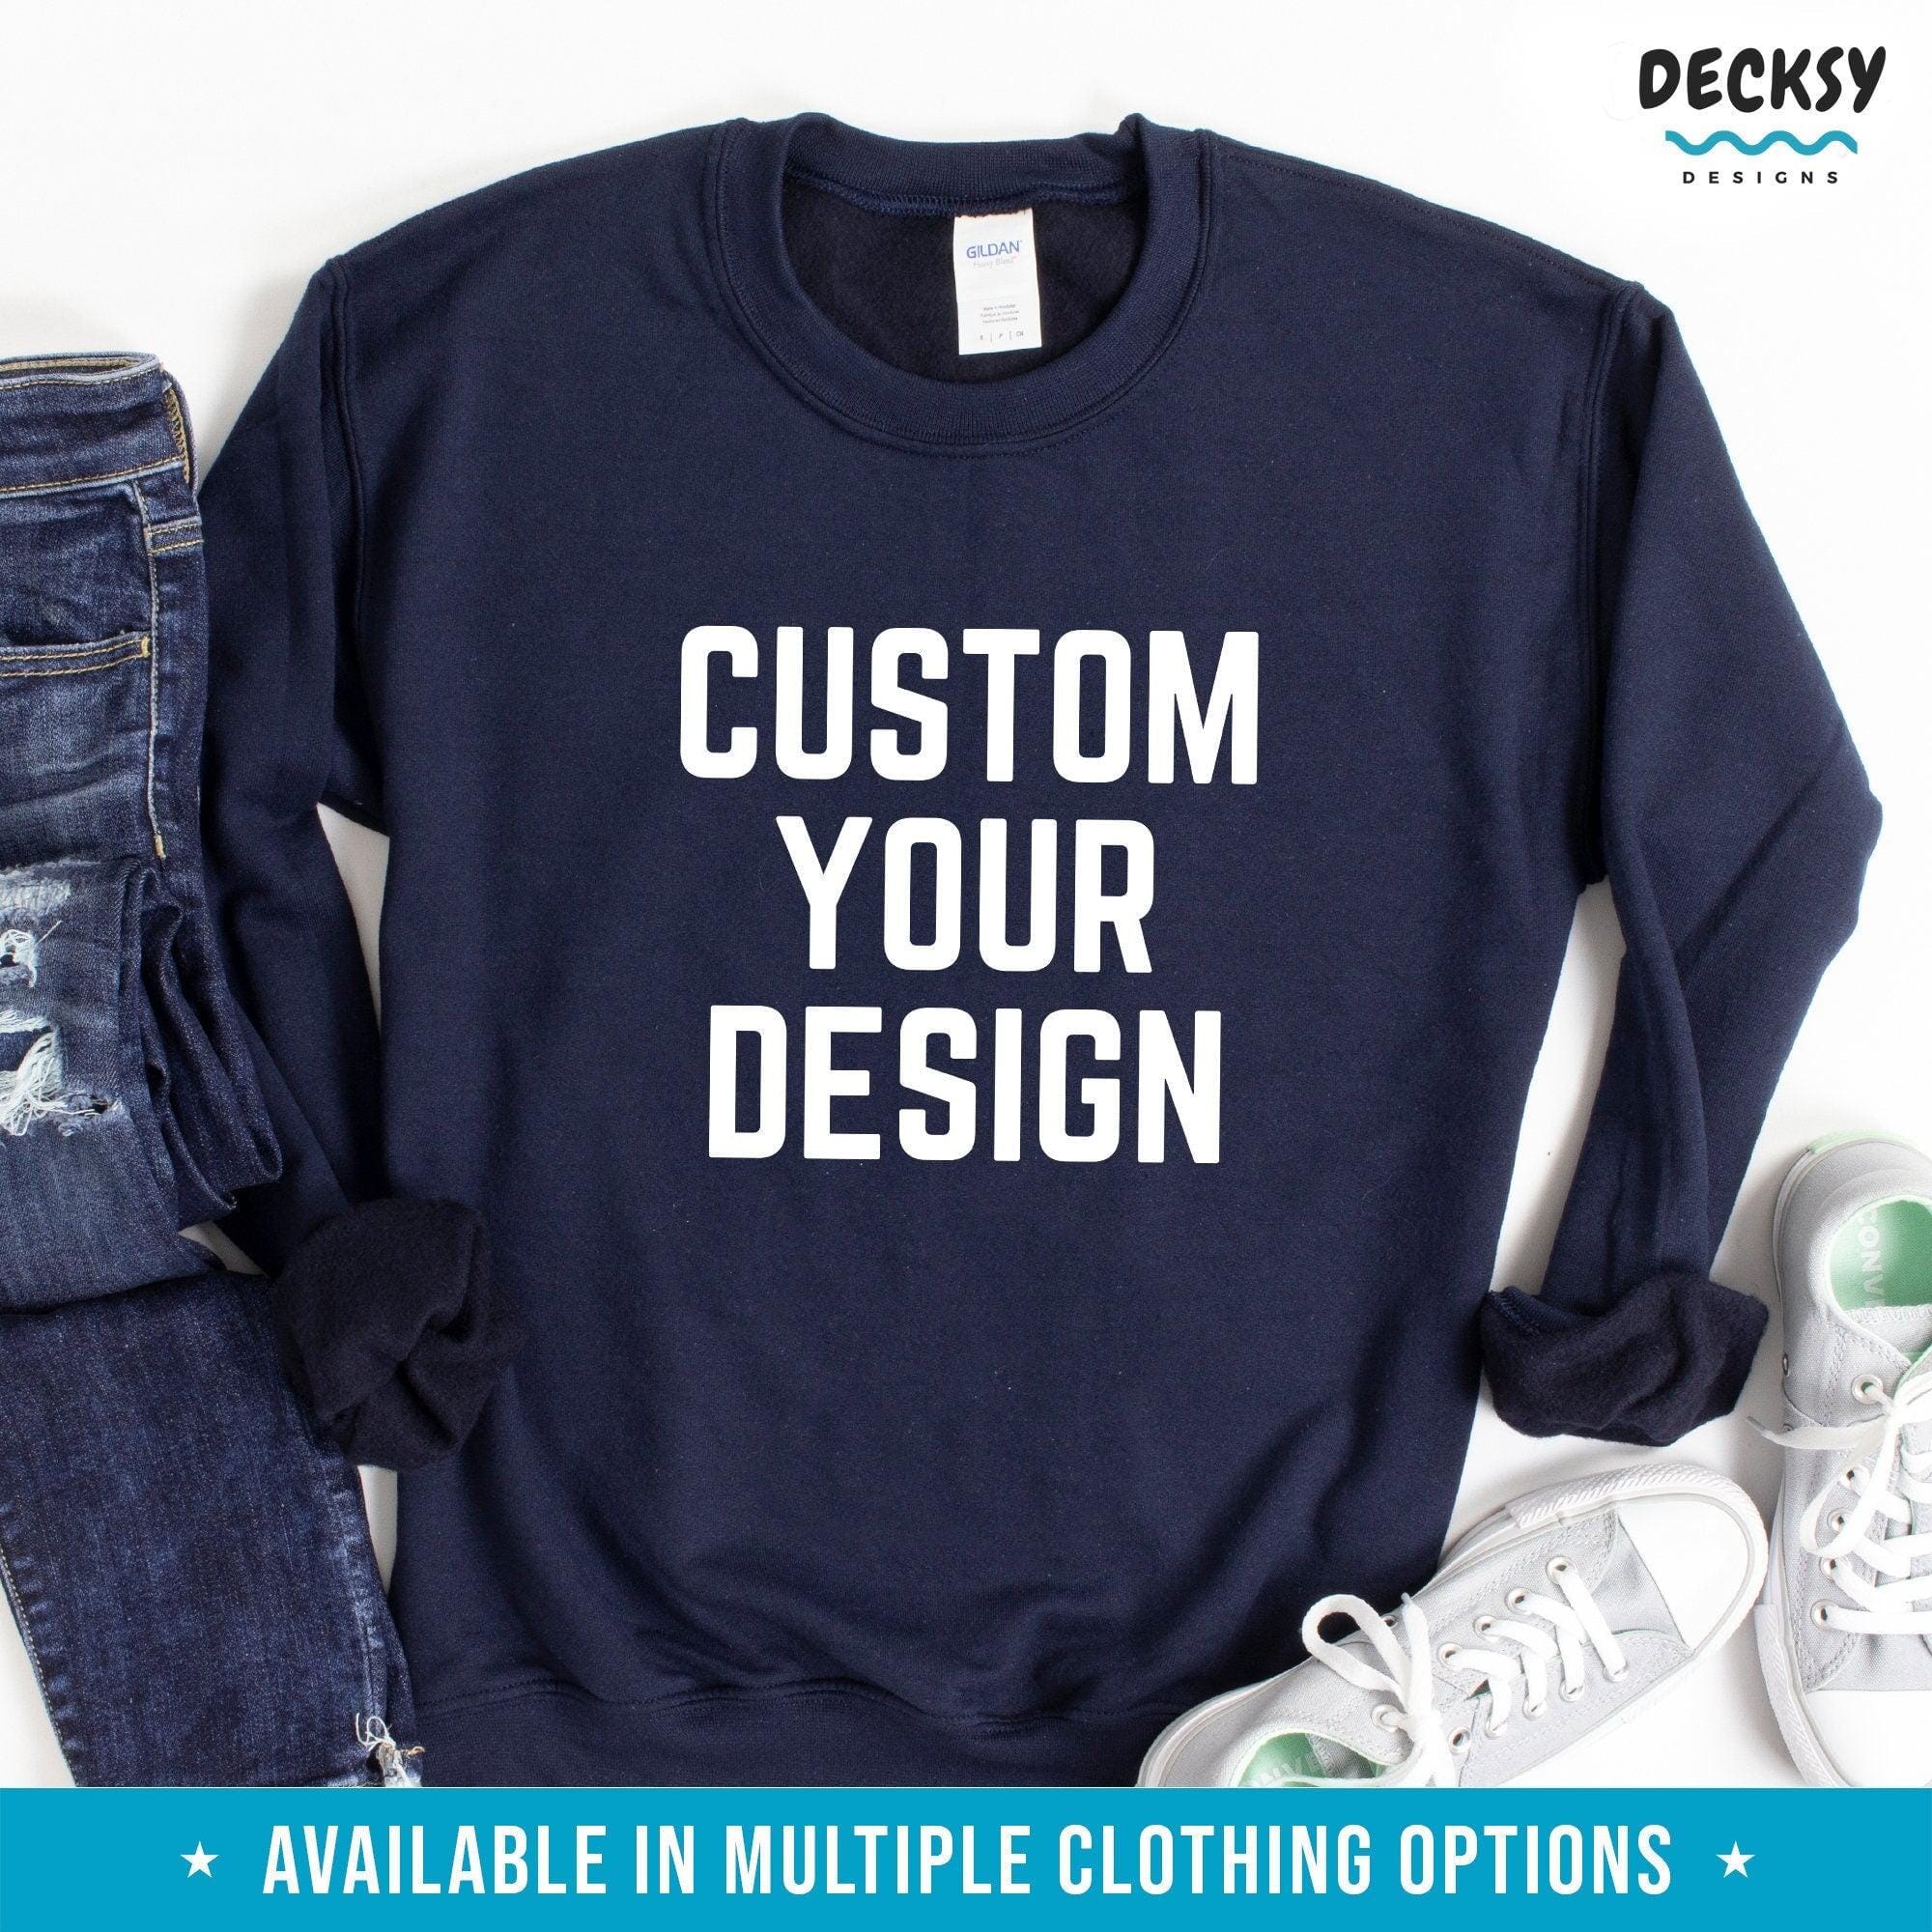 Custom Unisex Shirt, Personalised Gift-Clothing:Gender-Neutral Adult Clothing:Tops & Tees:T-shirts:Graphic Tees-DecksyDesigns